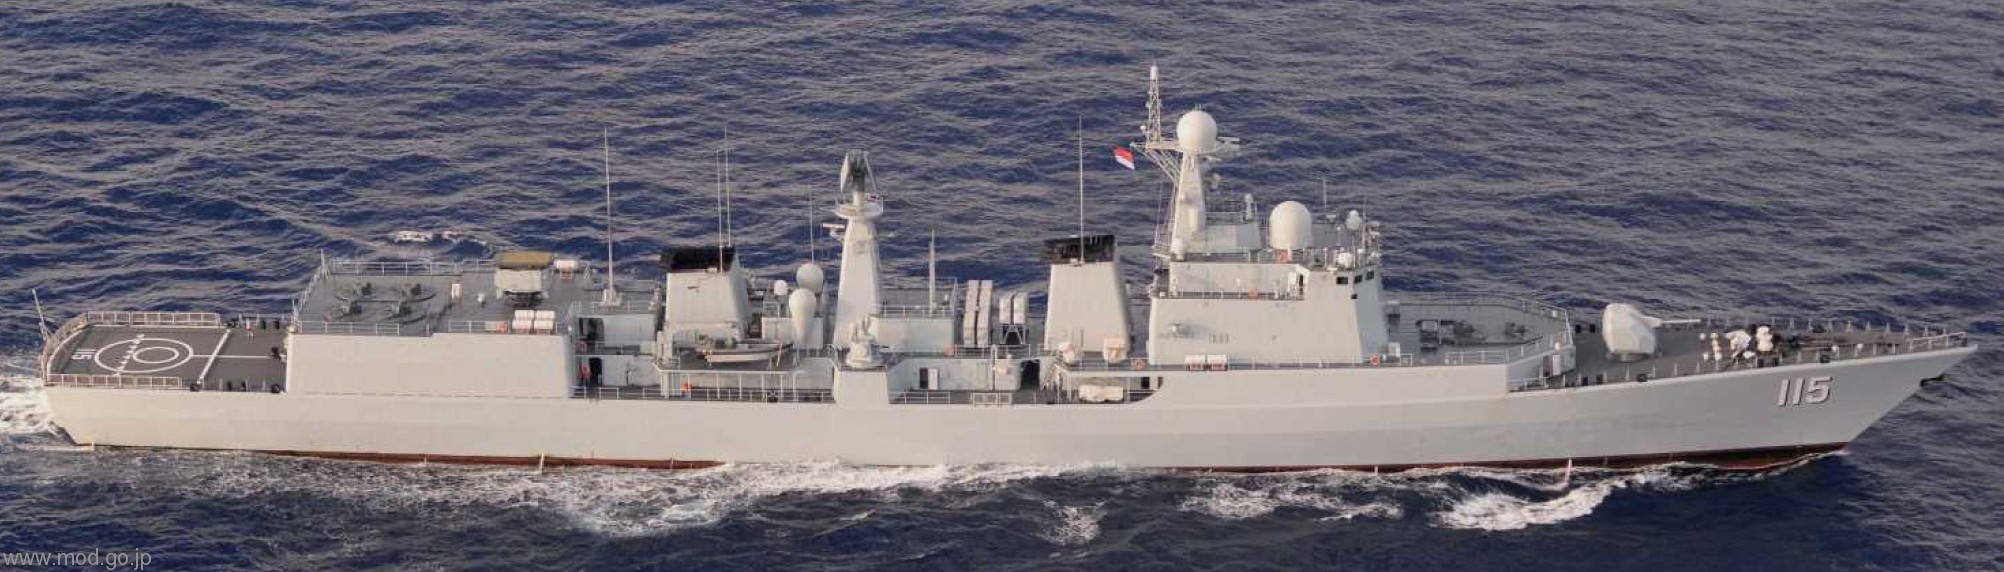 type 051c luzhou class guided missile destroyer people's liberation army navy china plans ddg-115 shenyang 06